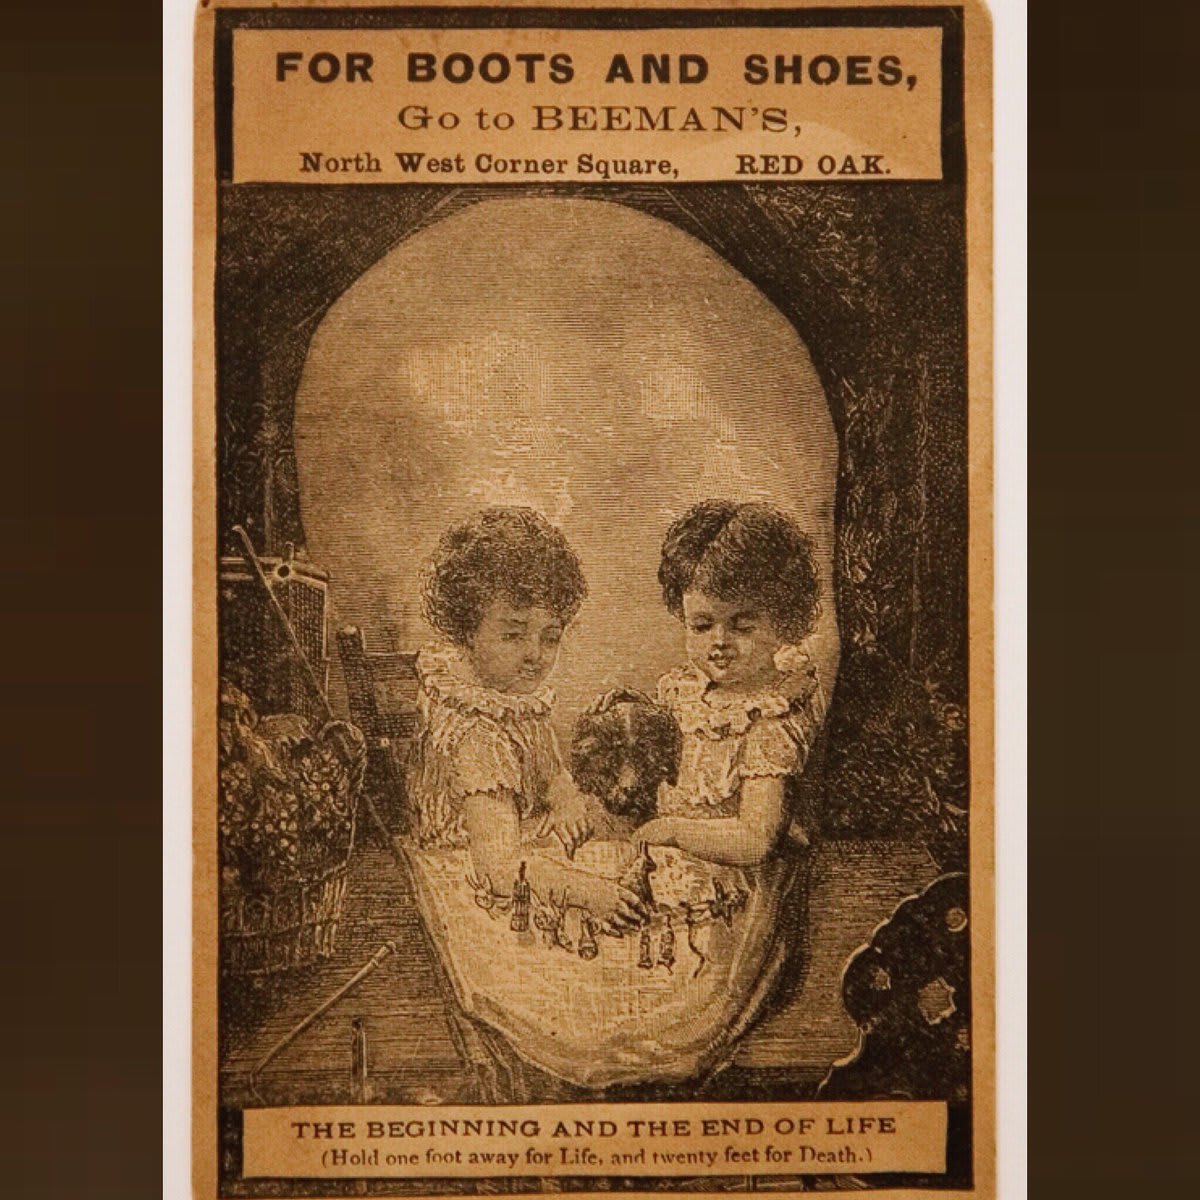 Optical illusions were fairly popular in the late Victorian Era, including those with macabre skull imagery. Still, this seems like an odd choice for a shoe ad.